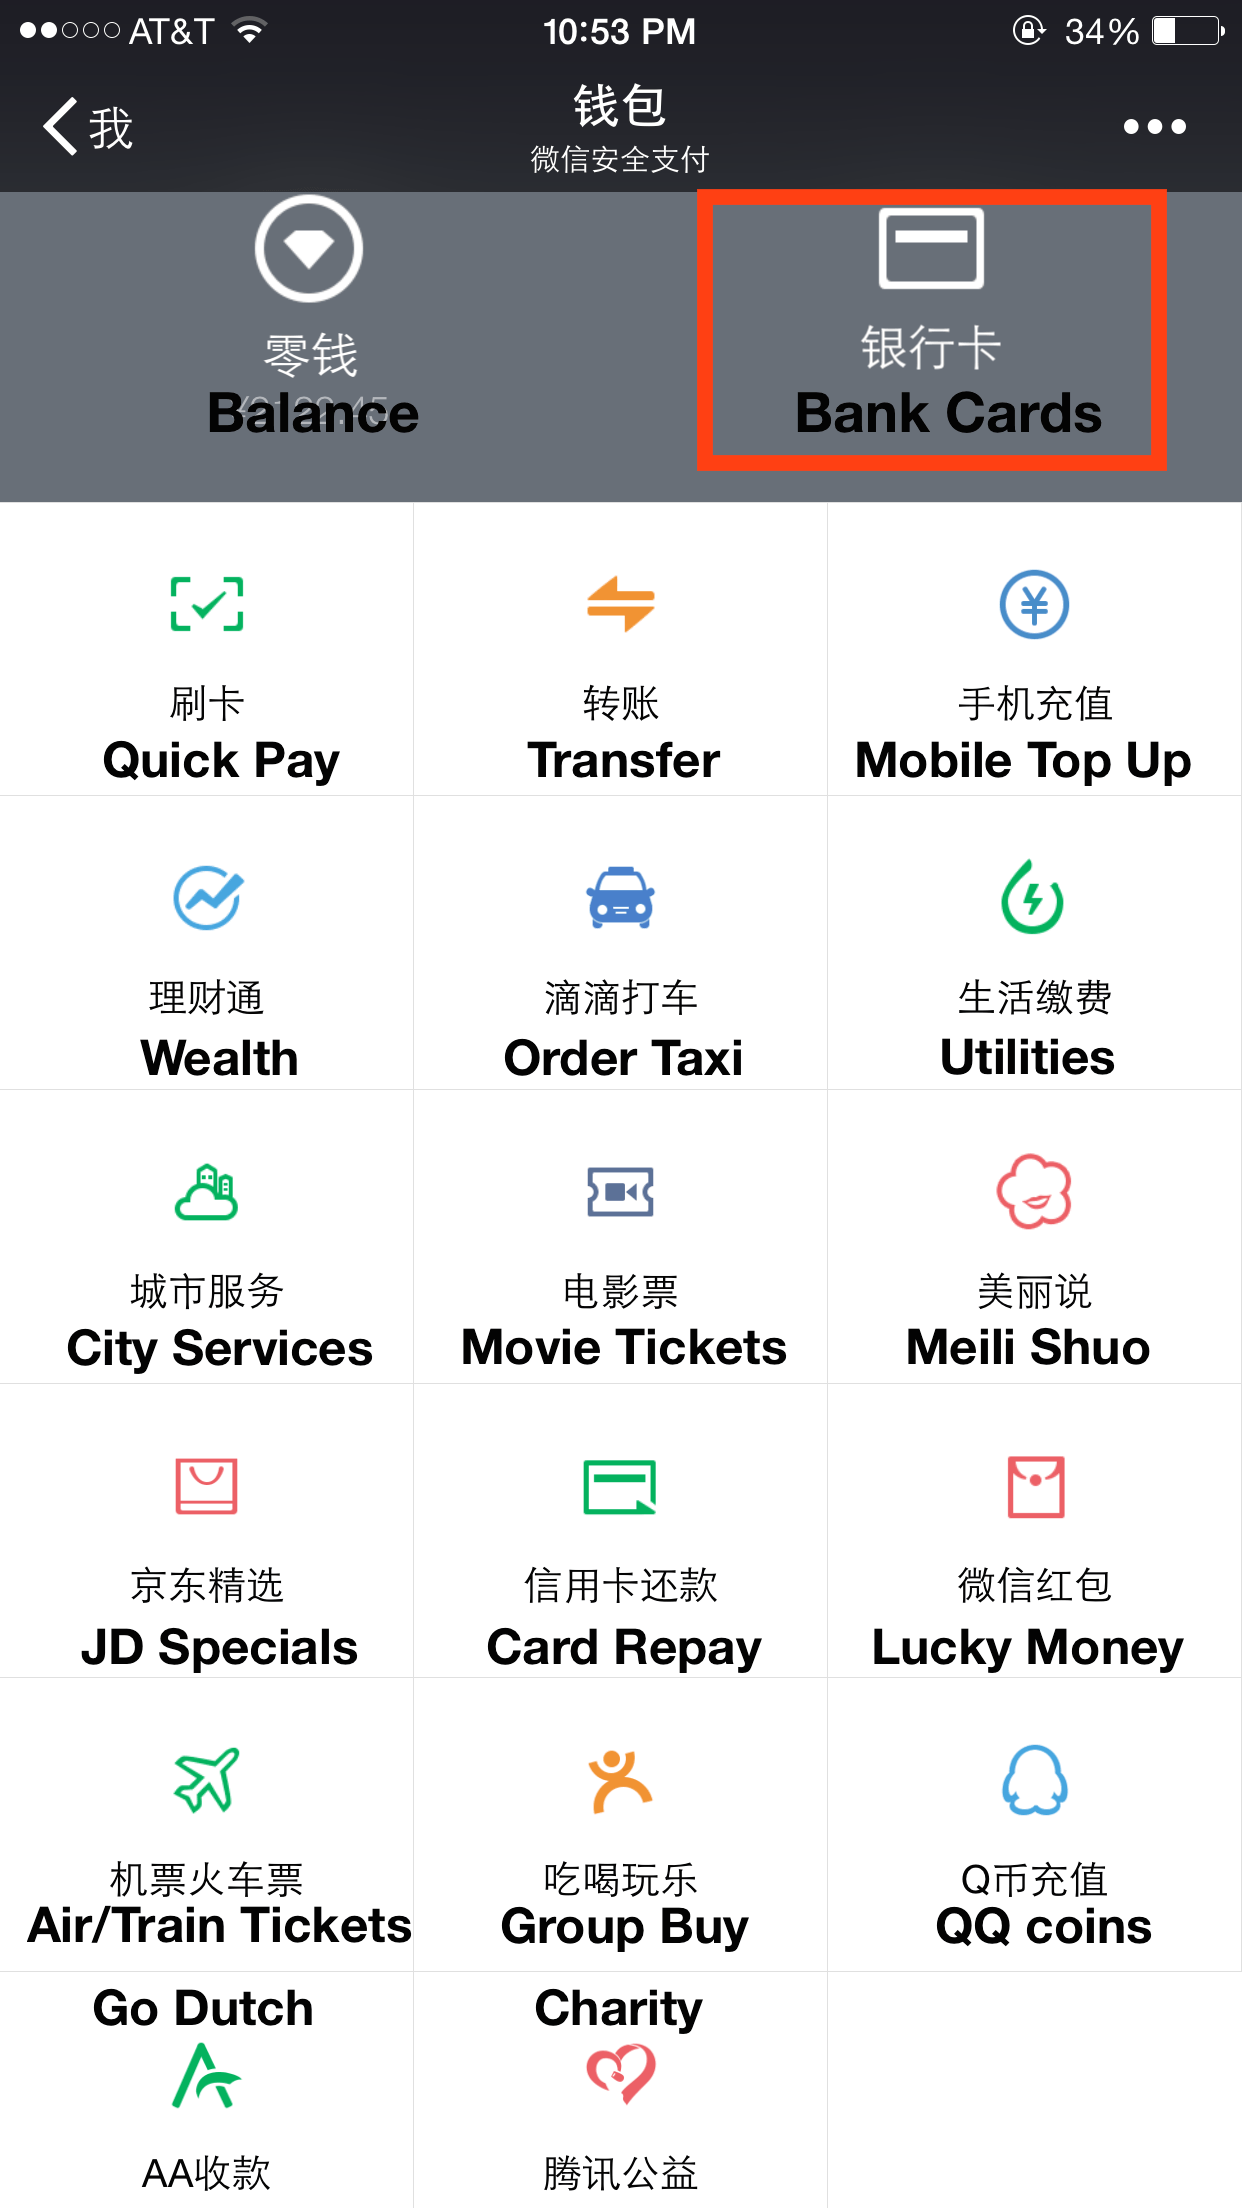 QQ Wallet Logo - When One App Rules Them All: The Case of WeChat and Mobile in China